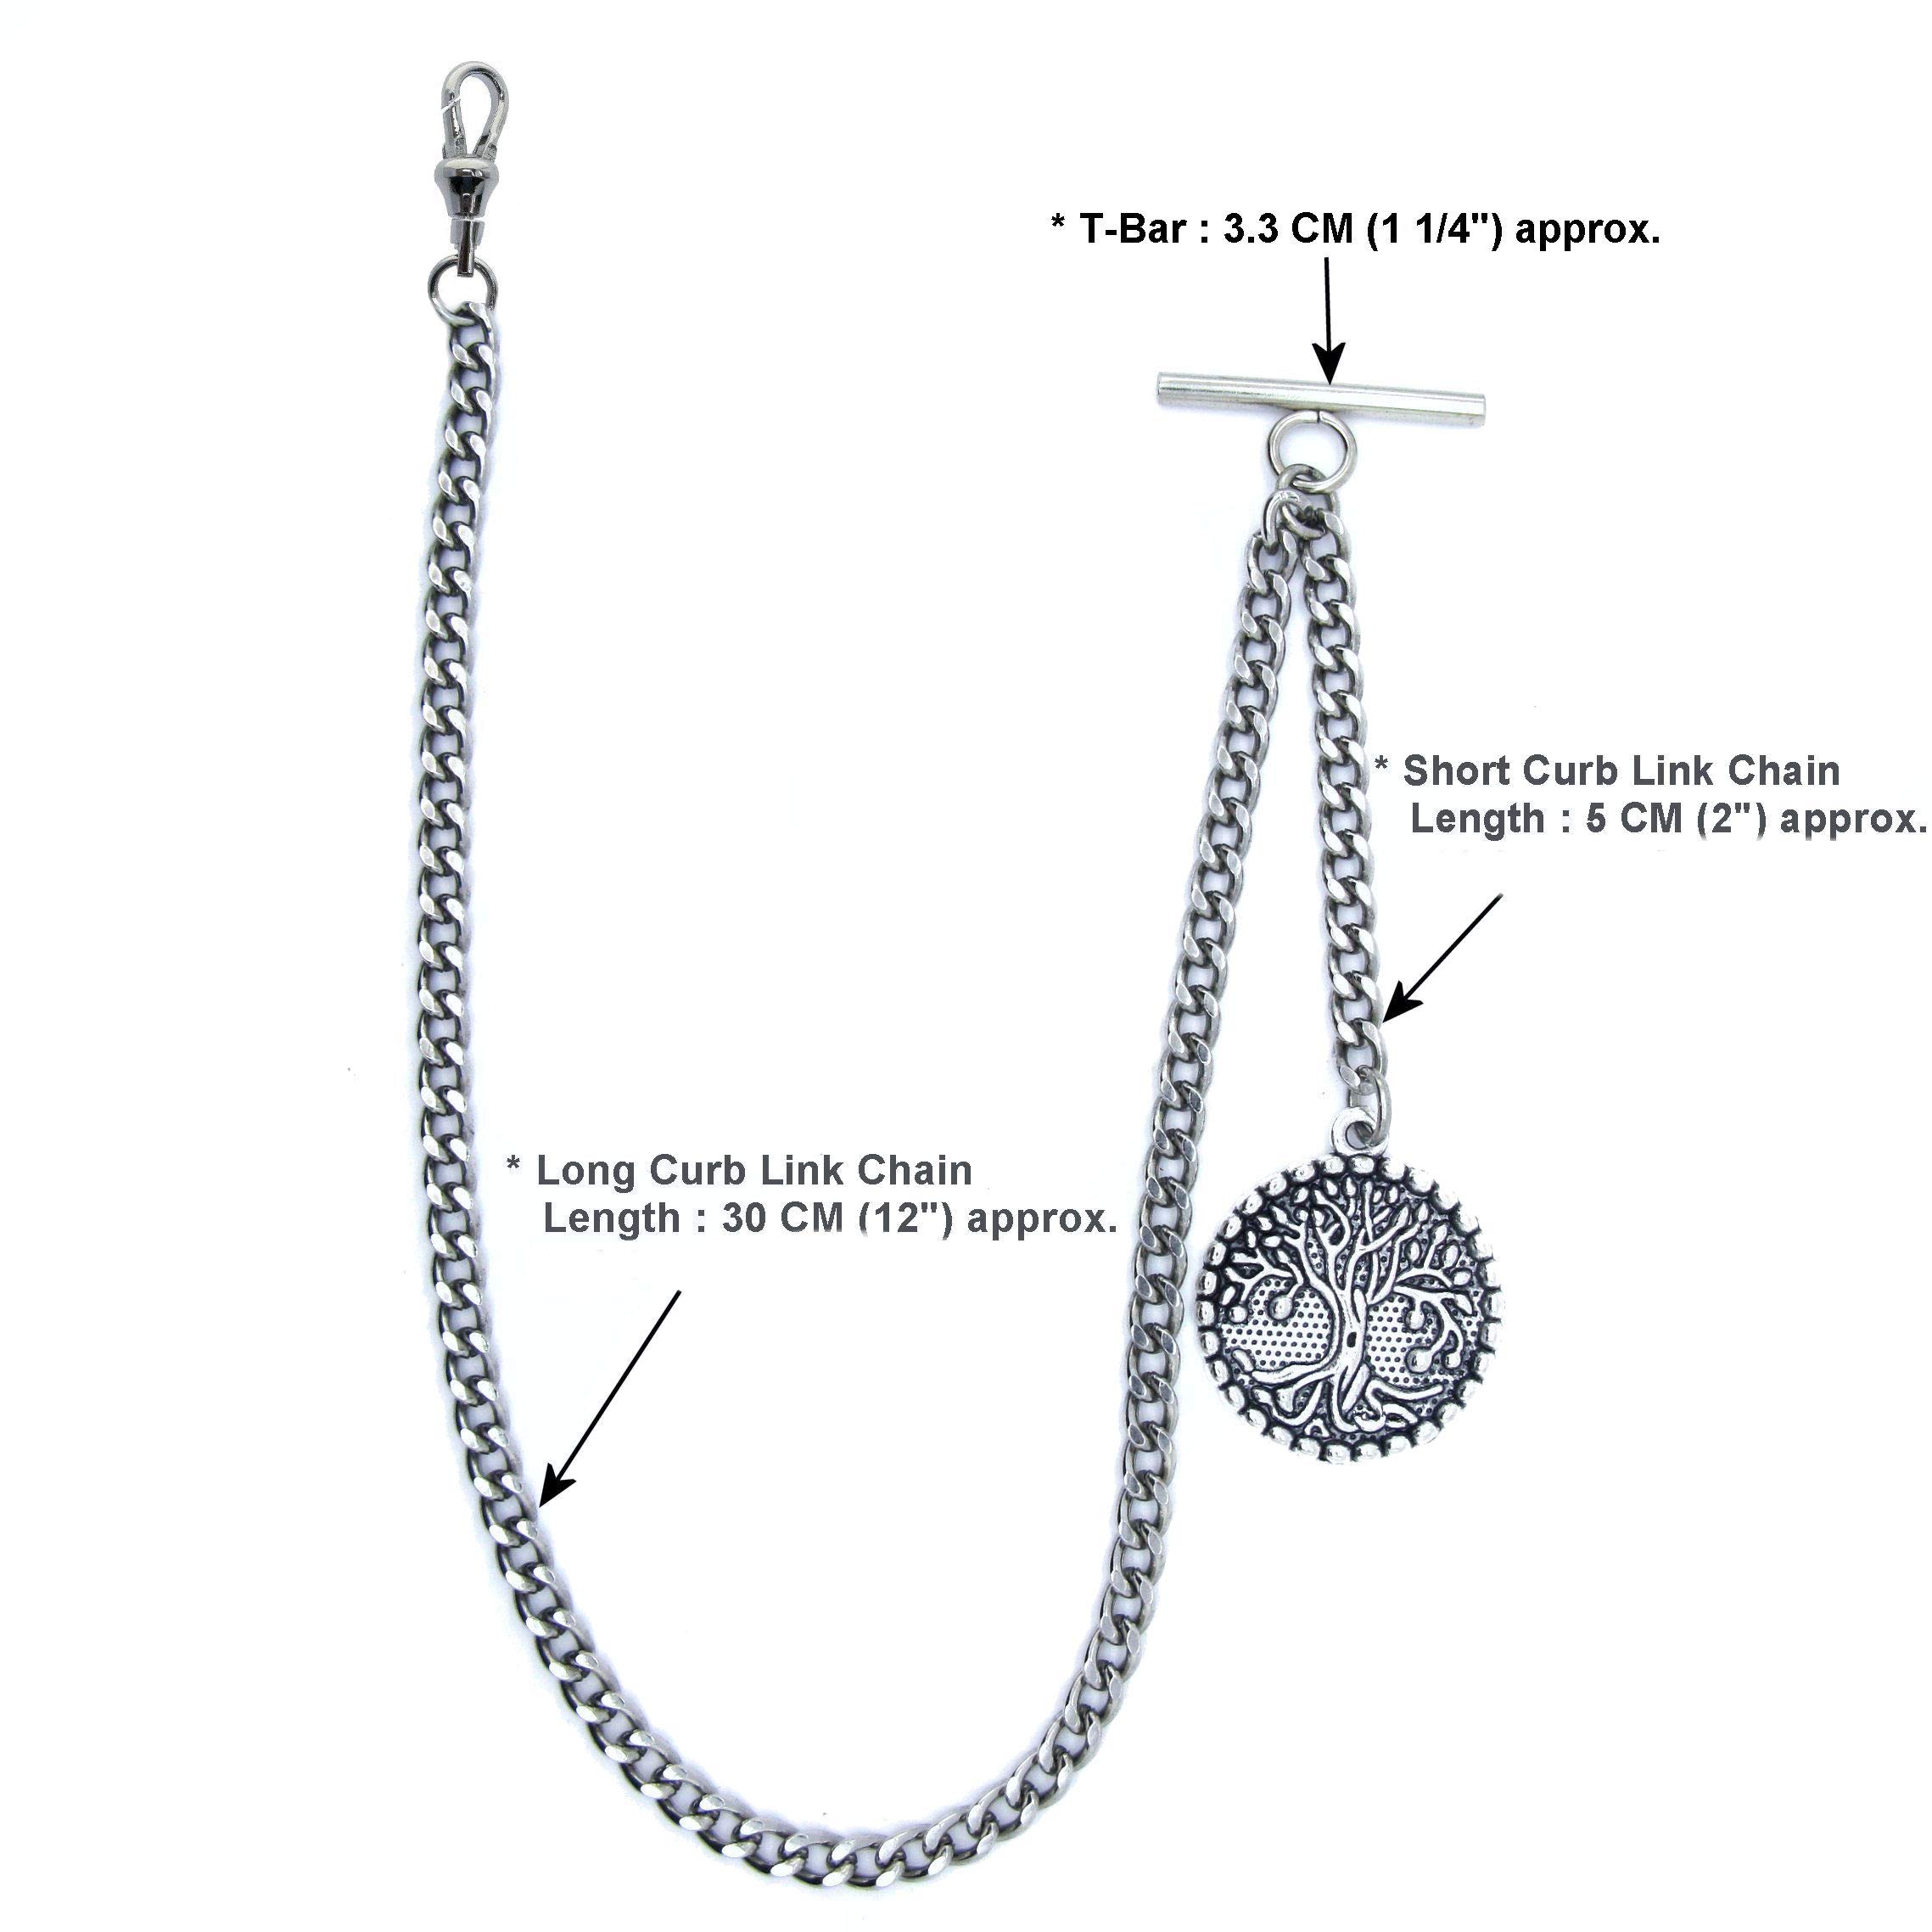 Albert Chain Silver Color Pocket Watch Chains for Men with 29 MM Big Size Life Tree Design Fob Swivel Clasp T Bar AC57